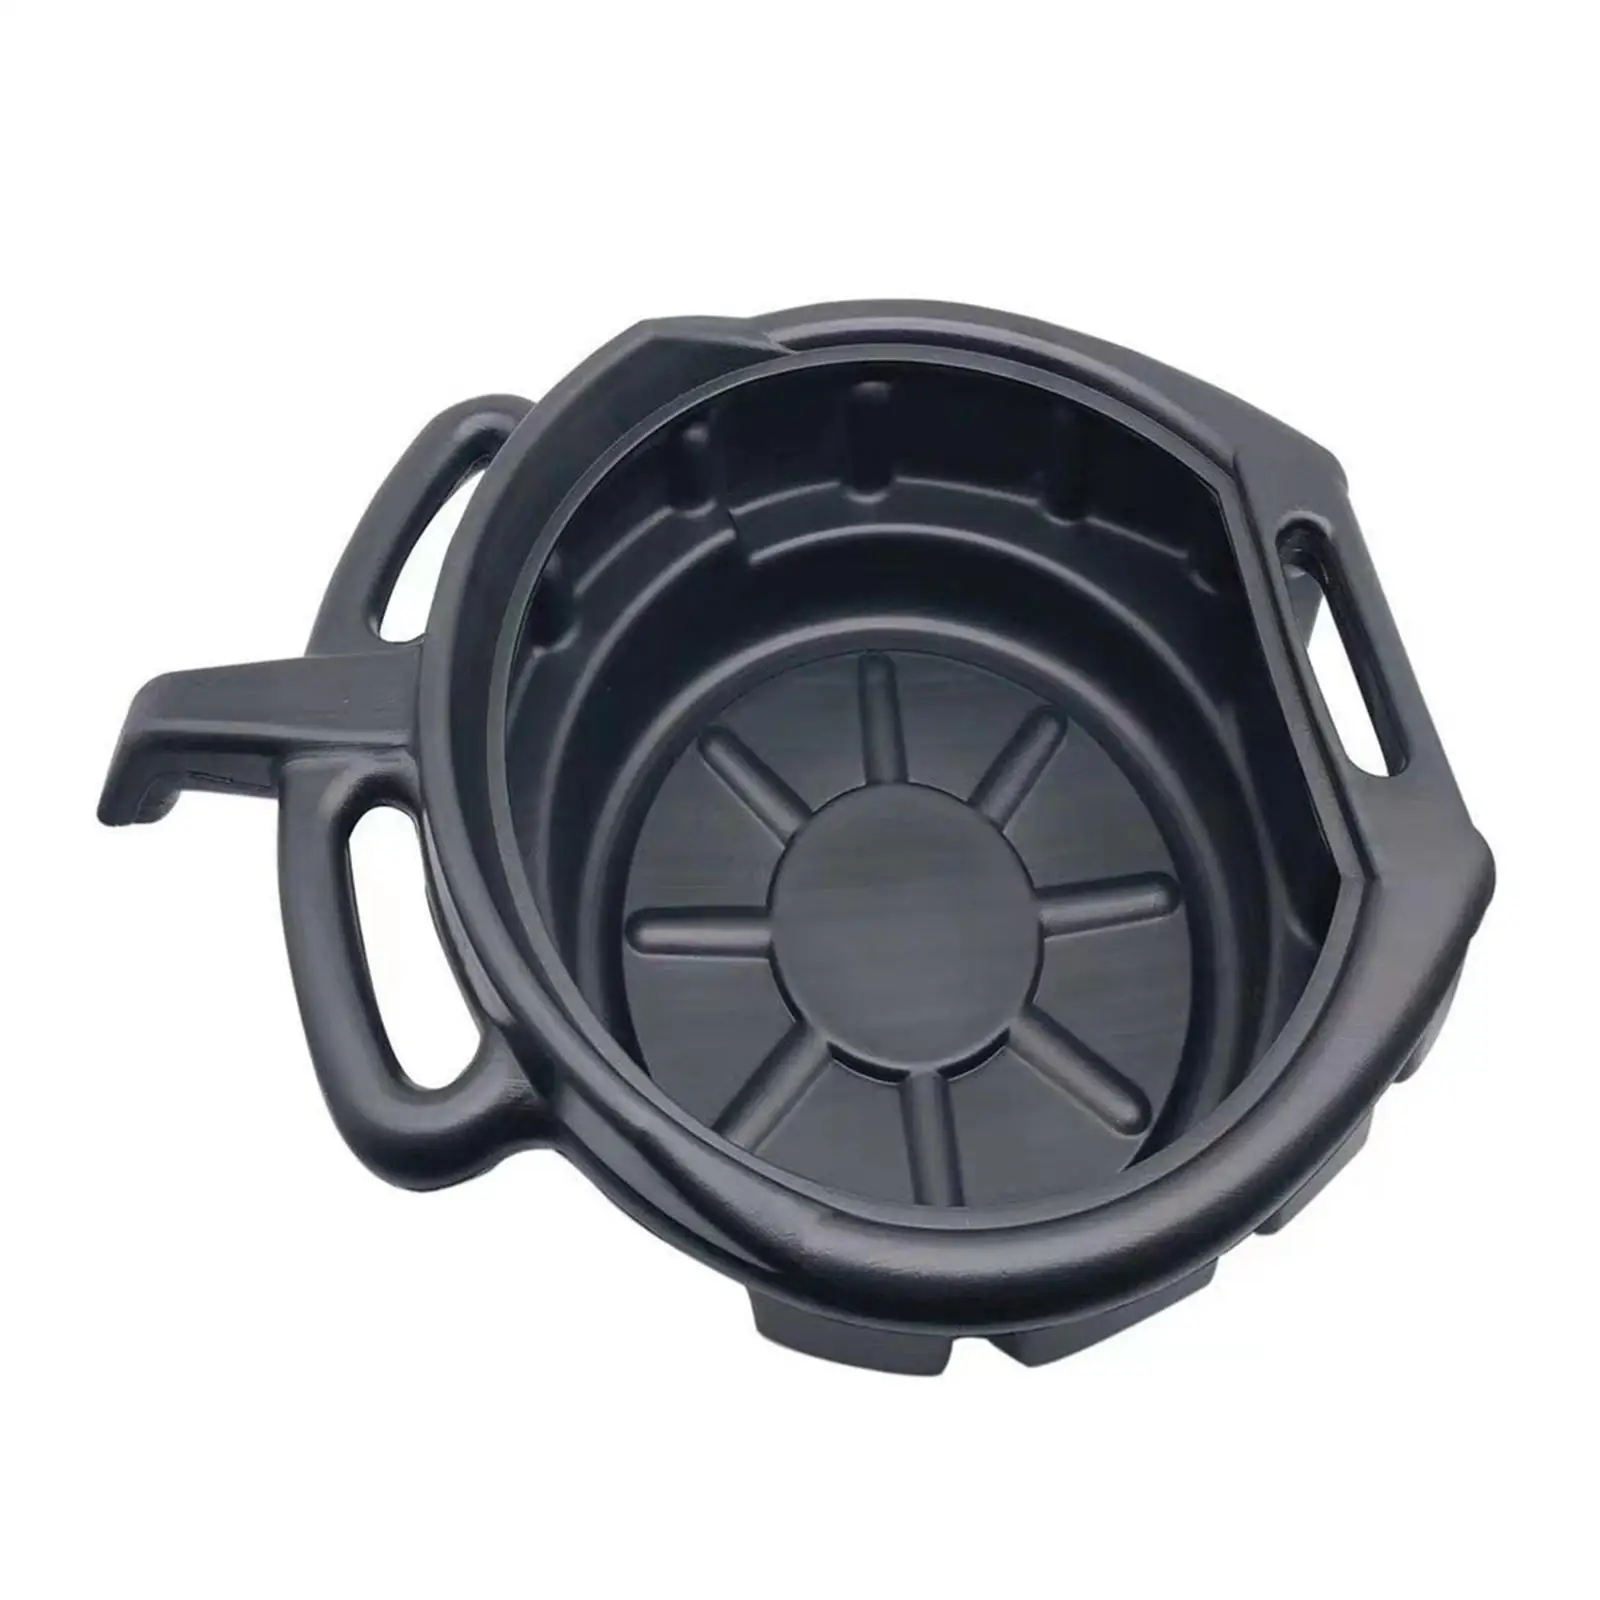 Oil Drain Can Car Accesories for Car Fuel Fluid Garage Tool Boat